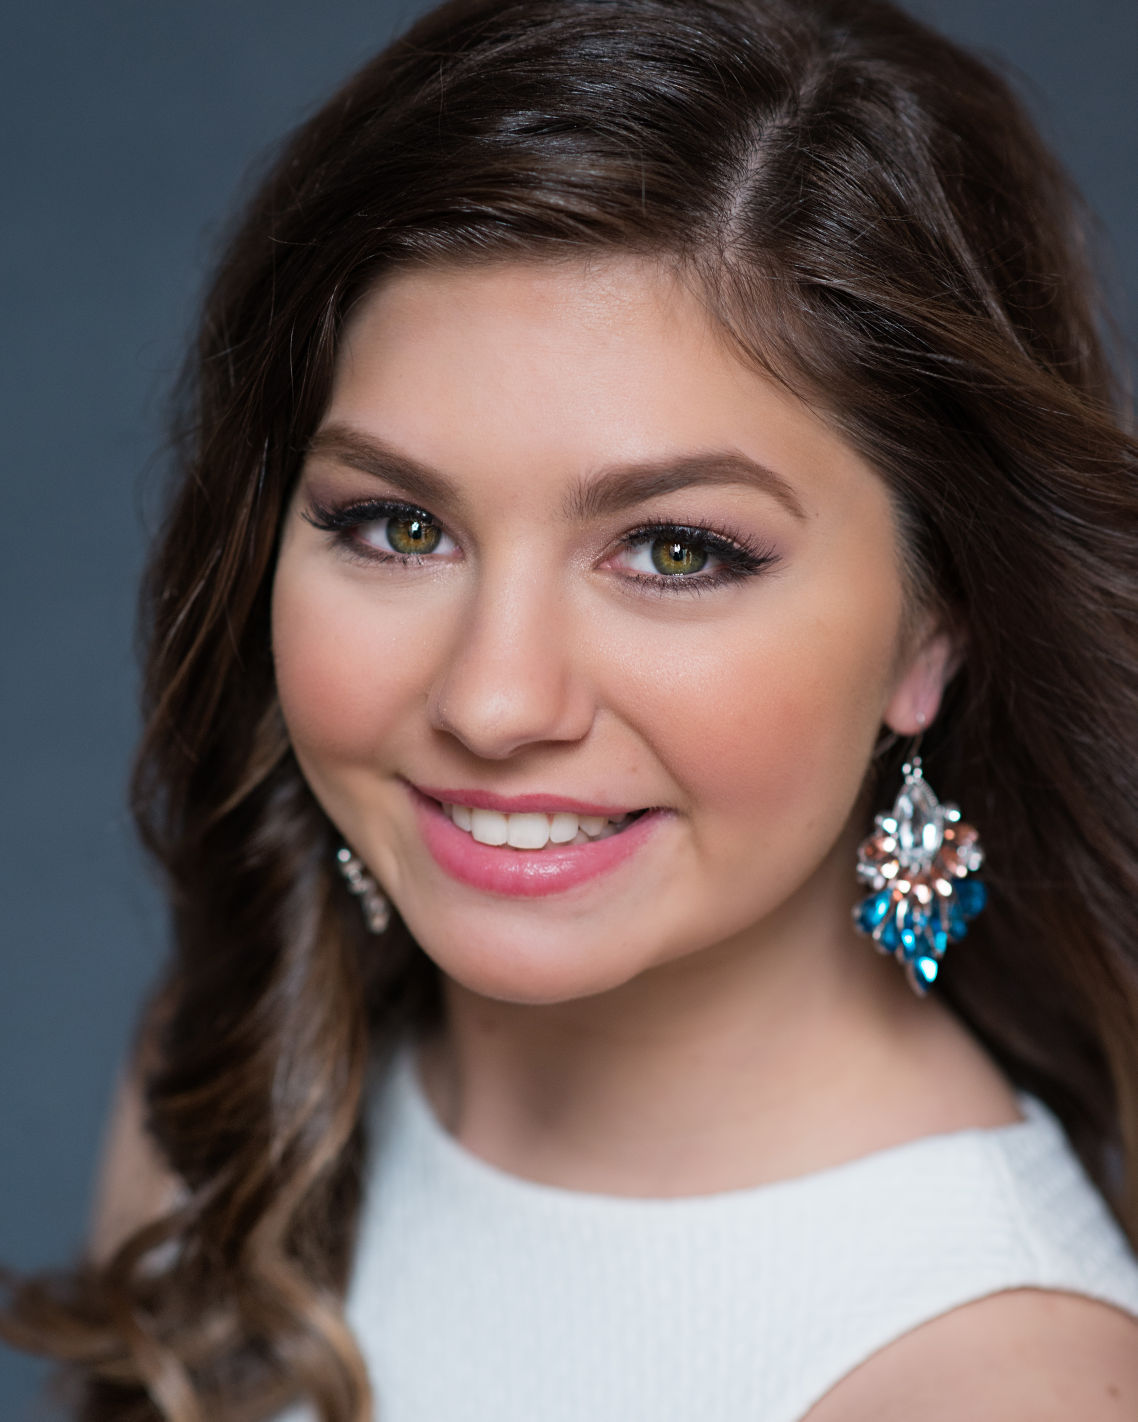 Miss Iowa's Outstanding Teen 2016 to be crowned Saturday | Local News ...